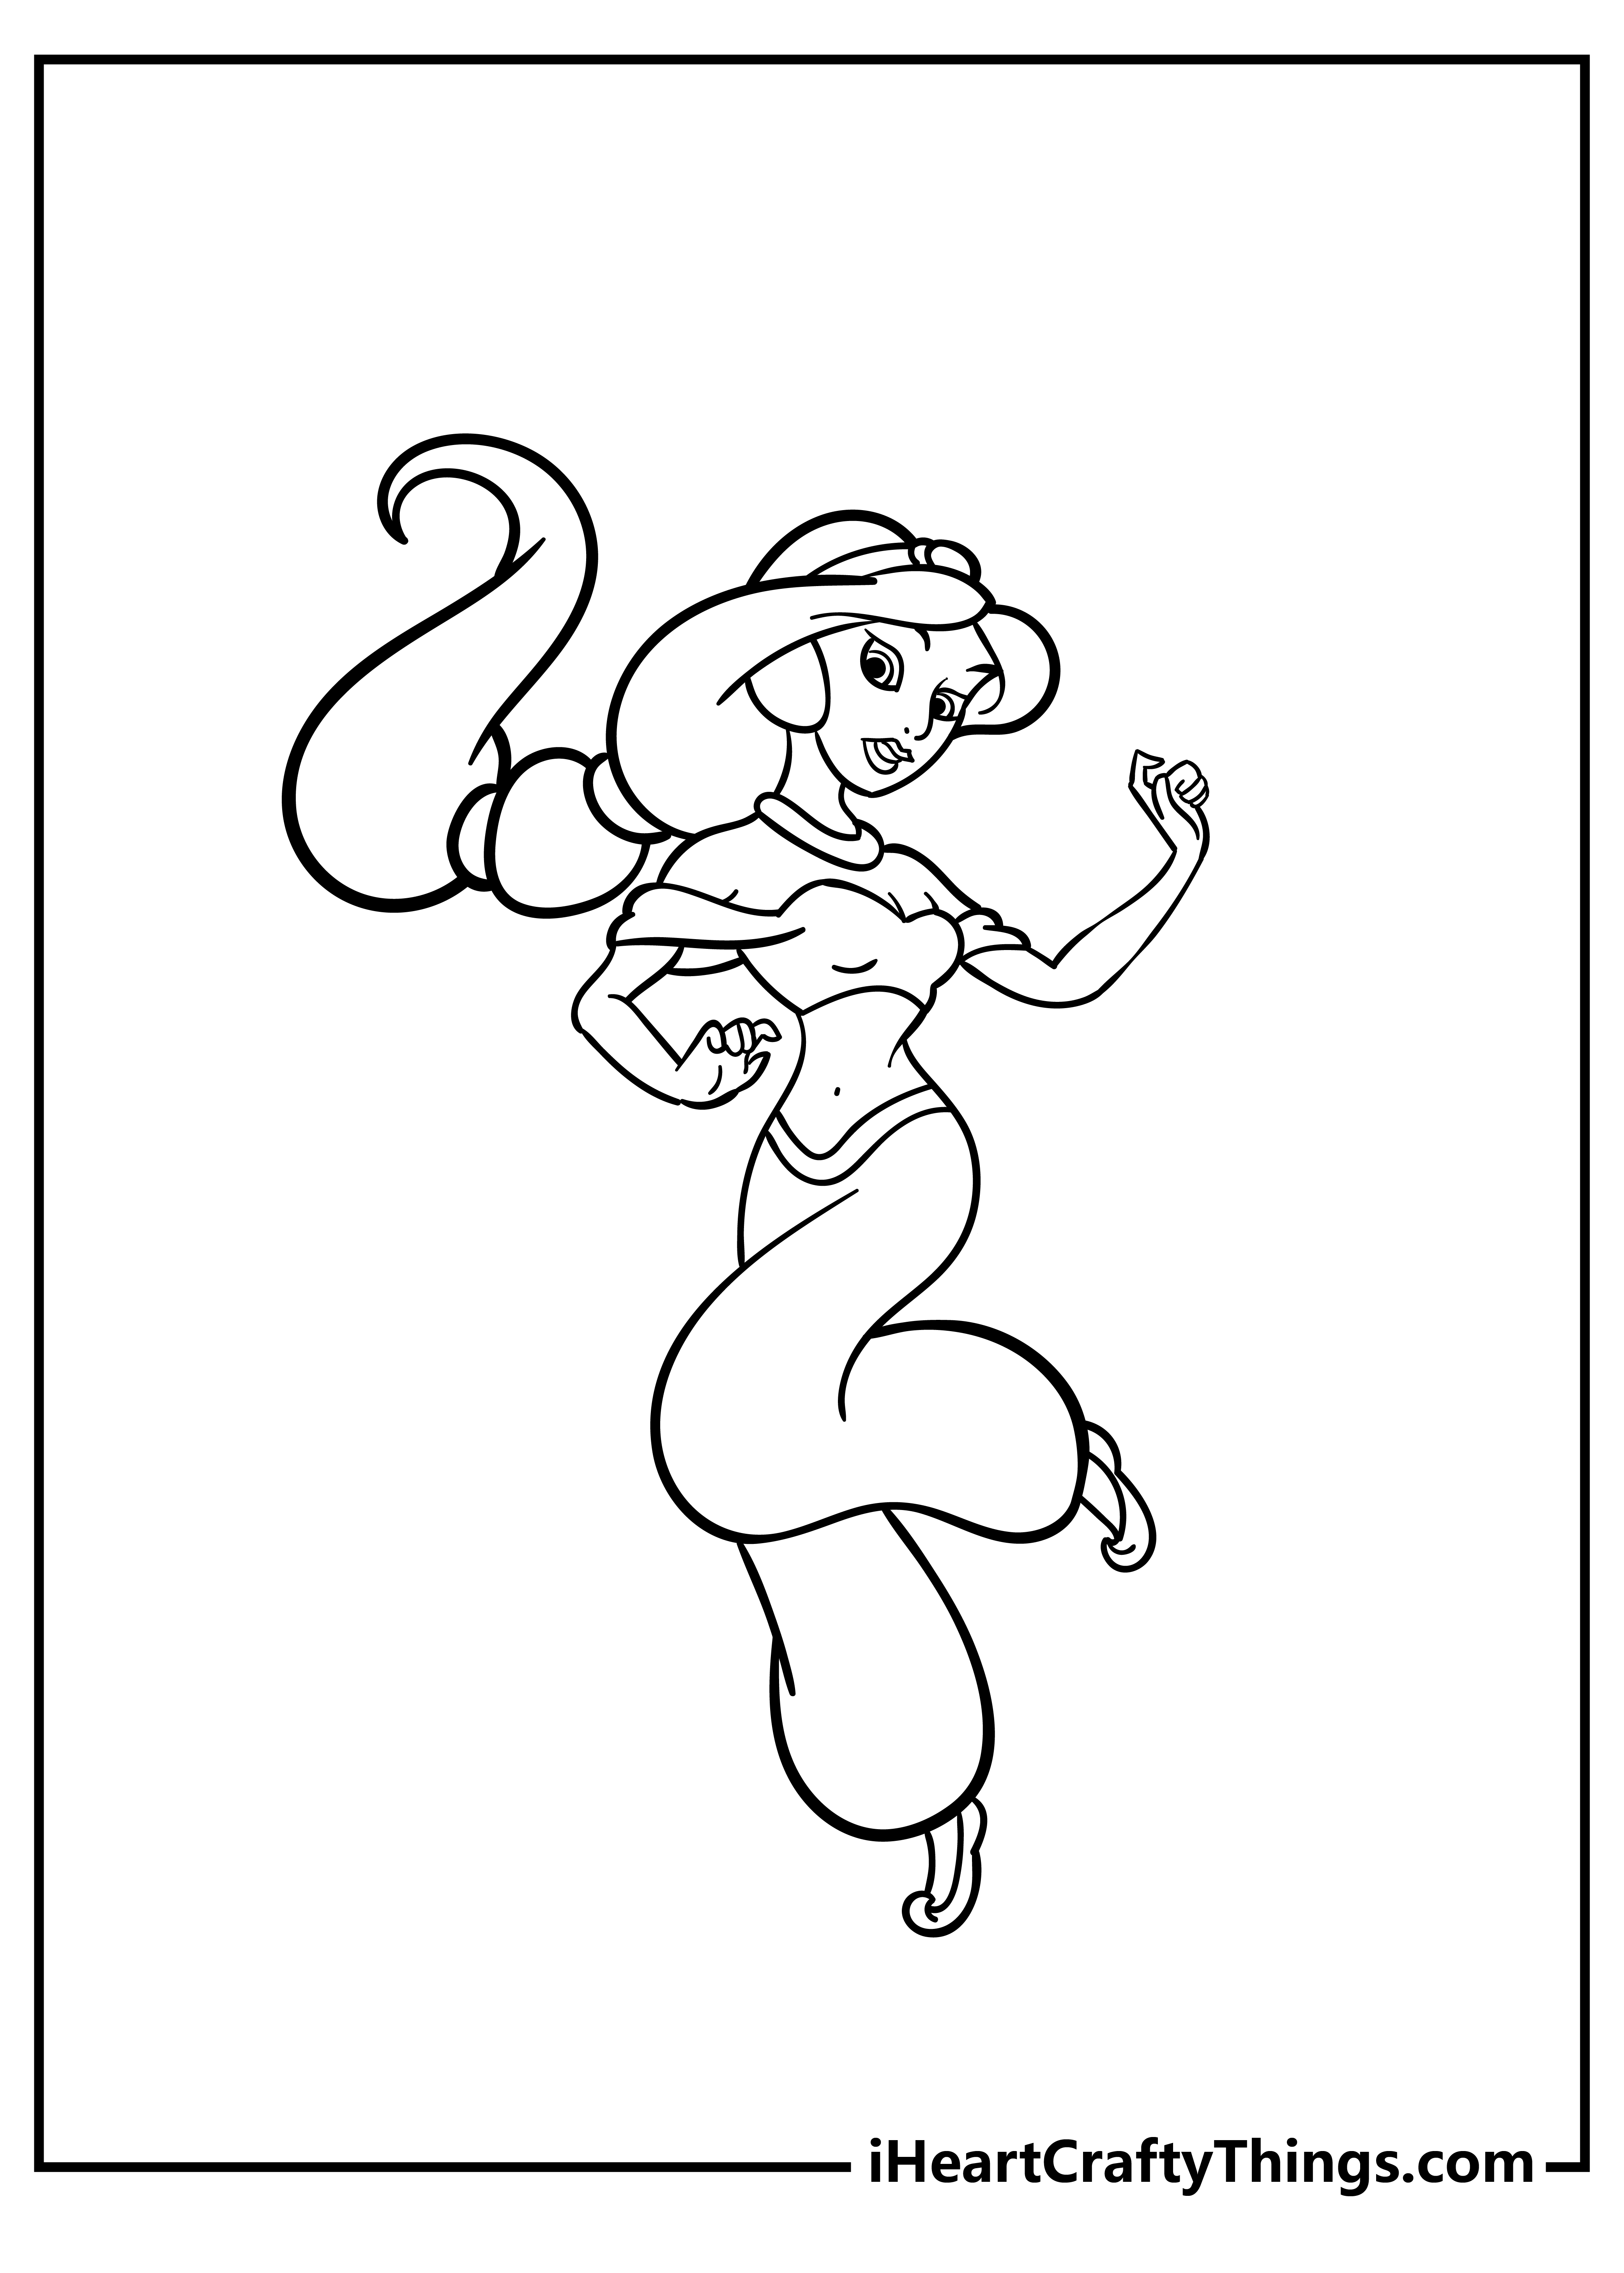 Jasmine Coloring Pages for adults free printable